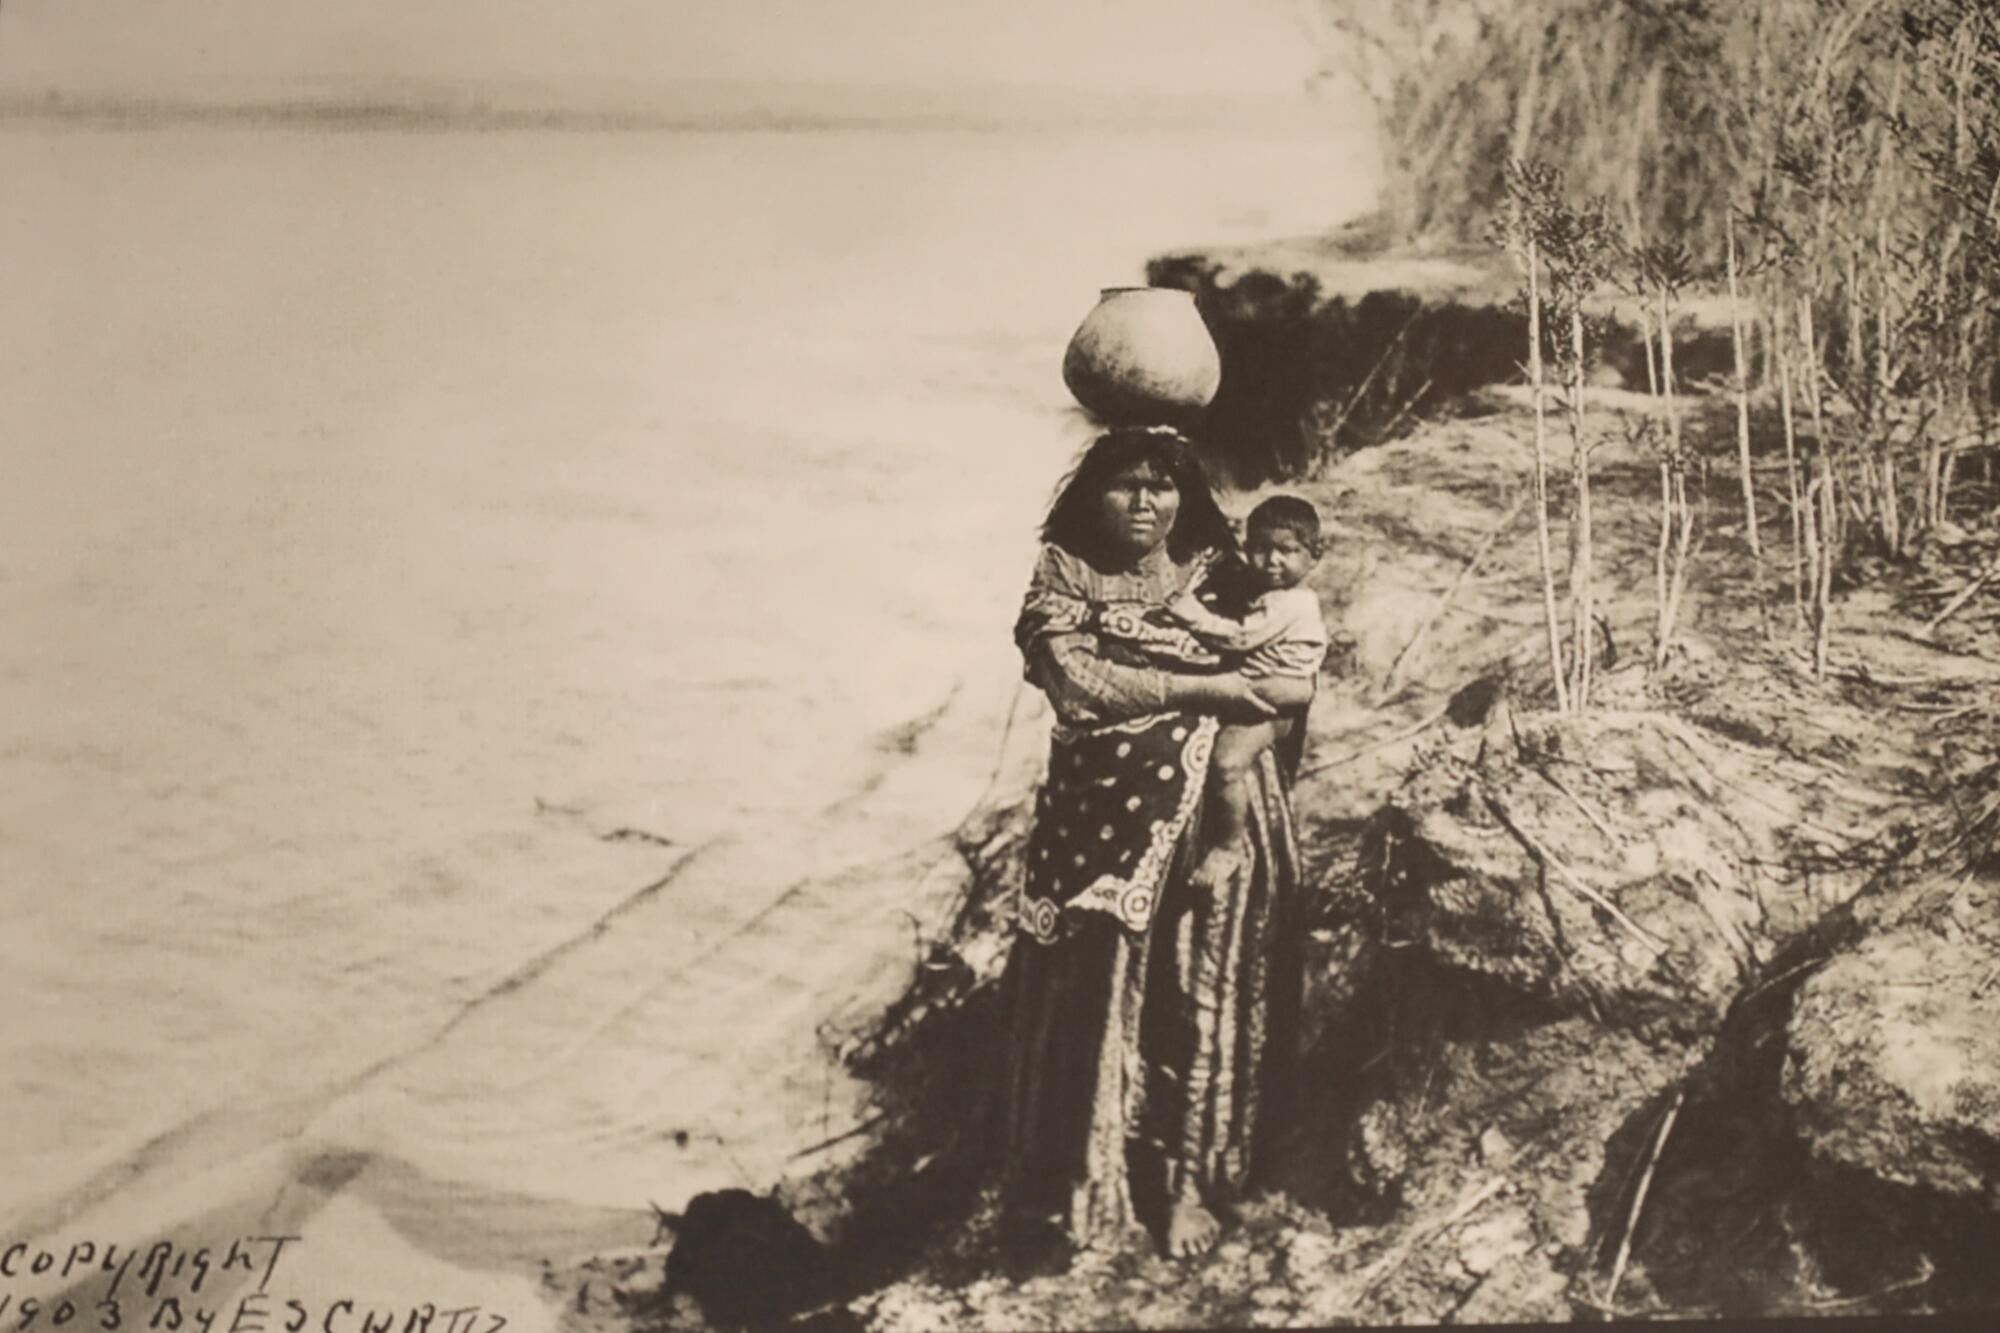 An old photo shows a woman holding a baby along a river